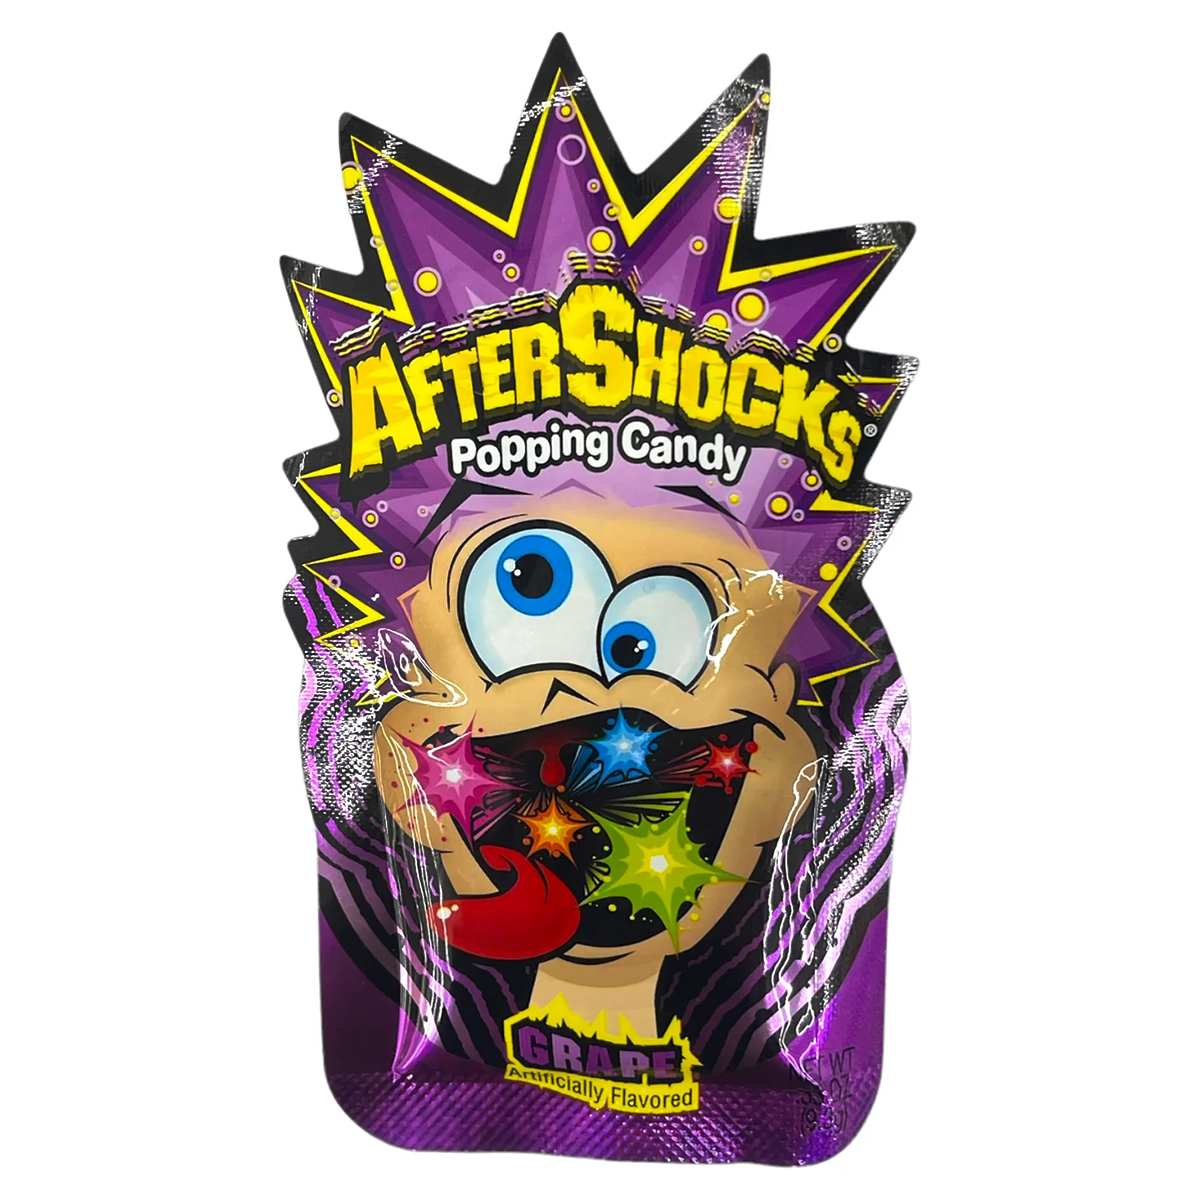 AfterShocks Popping Candy - Grape